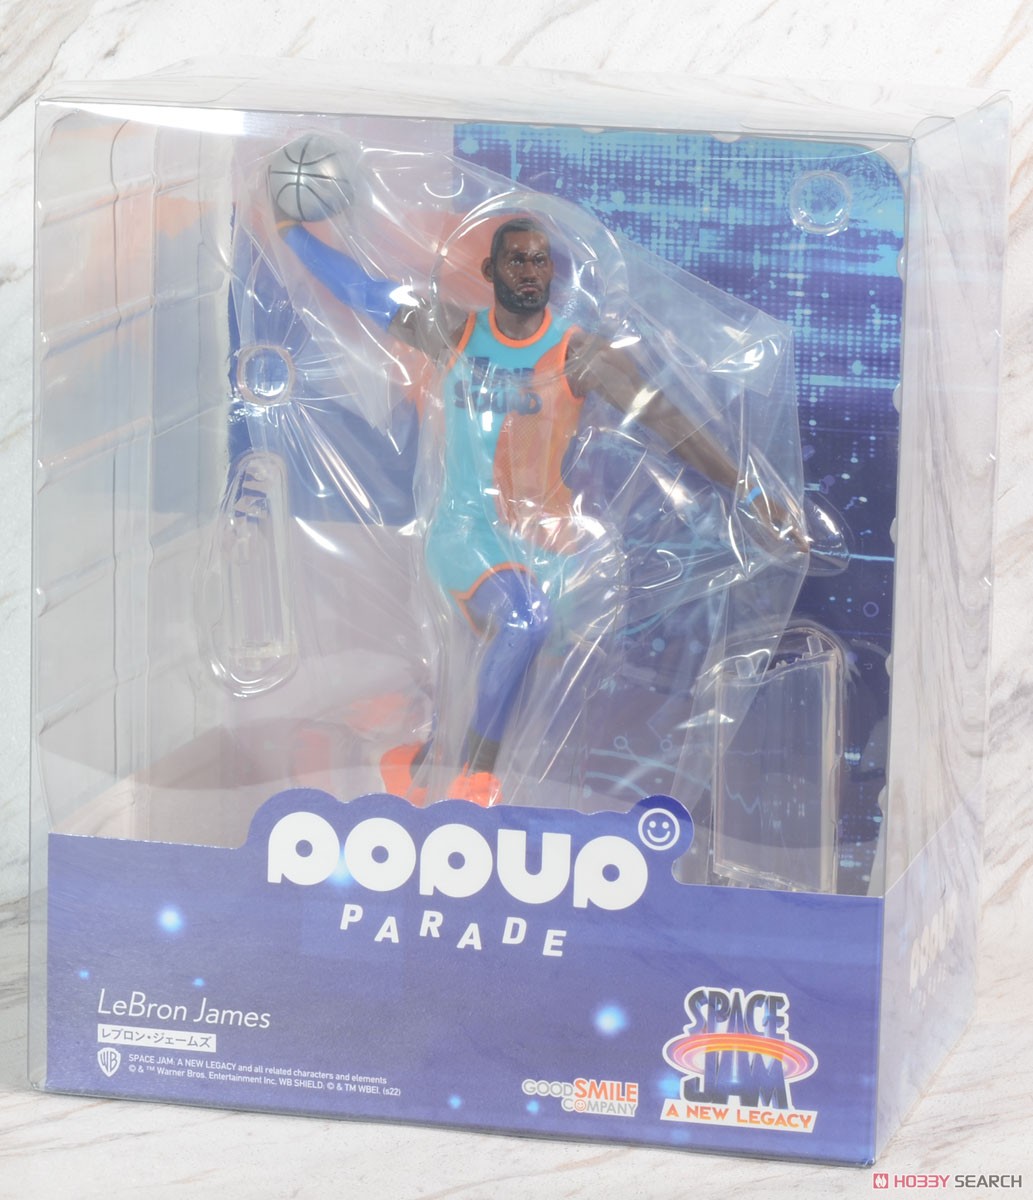 Pop Up Parade LeBron James (Completed) Package1